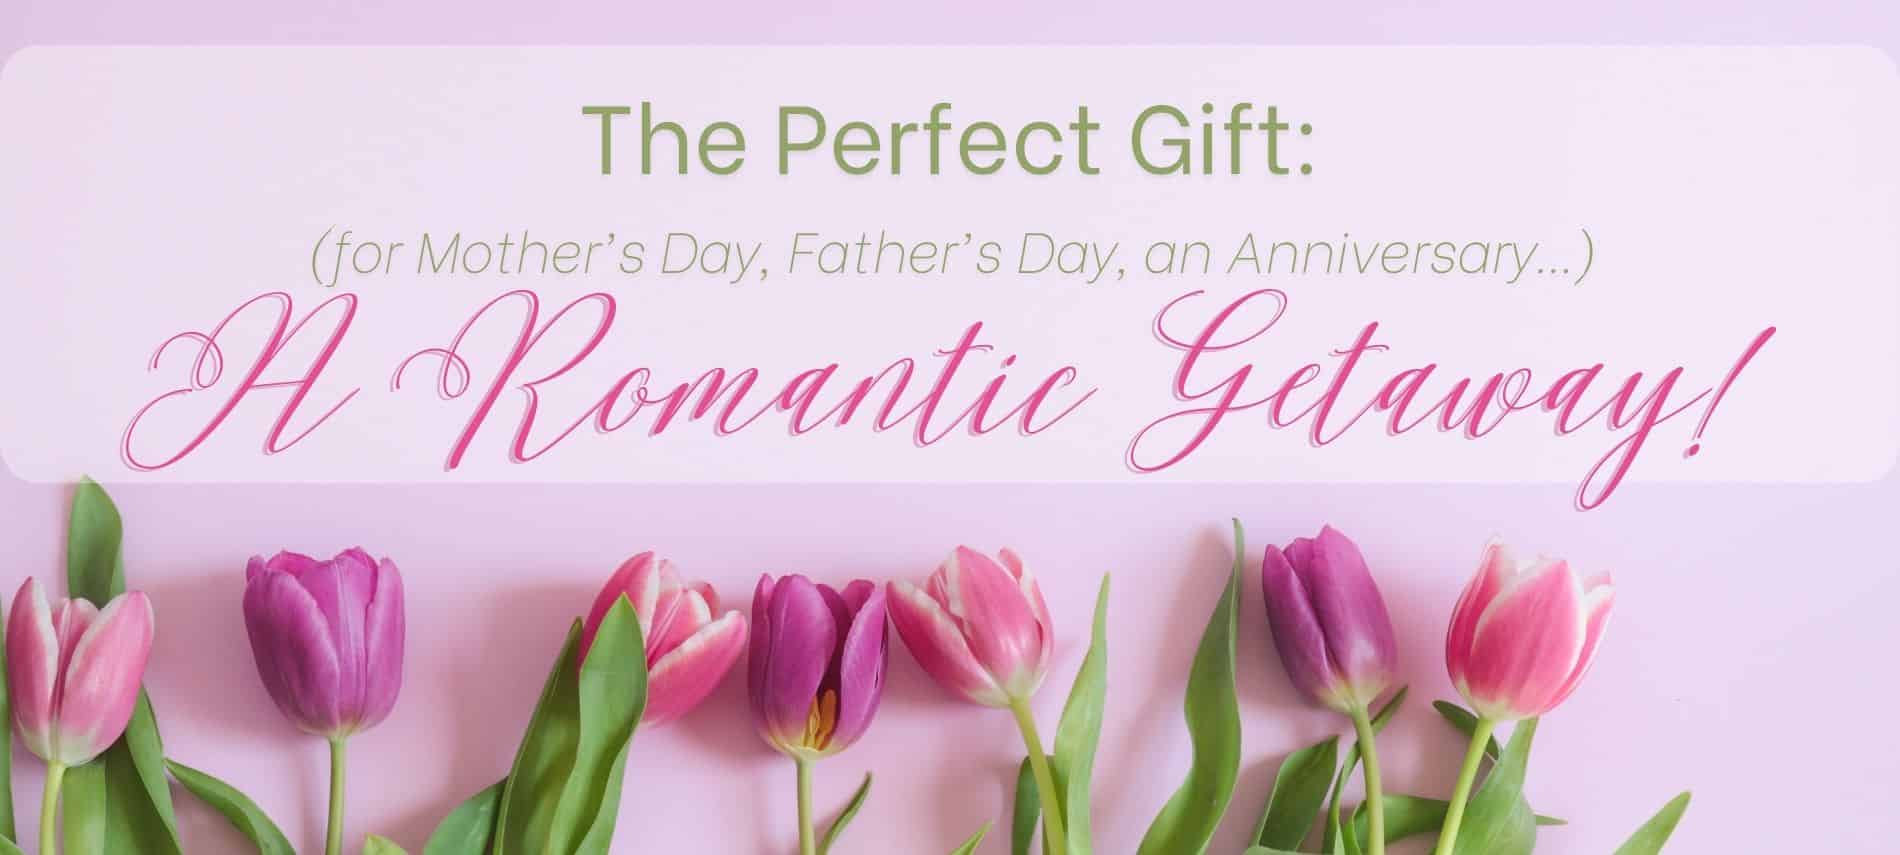 Background of pink tulips with text: The Perfect Gift - a Romantic Getaway